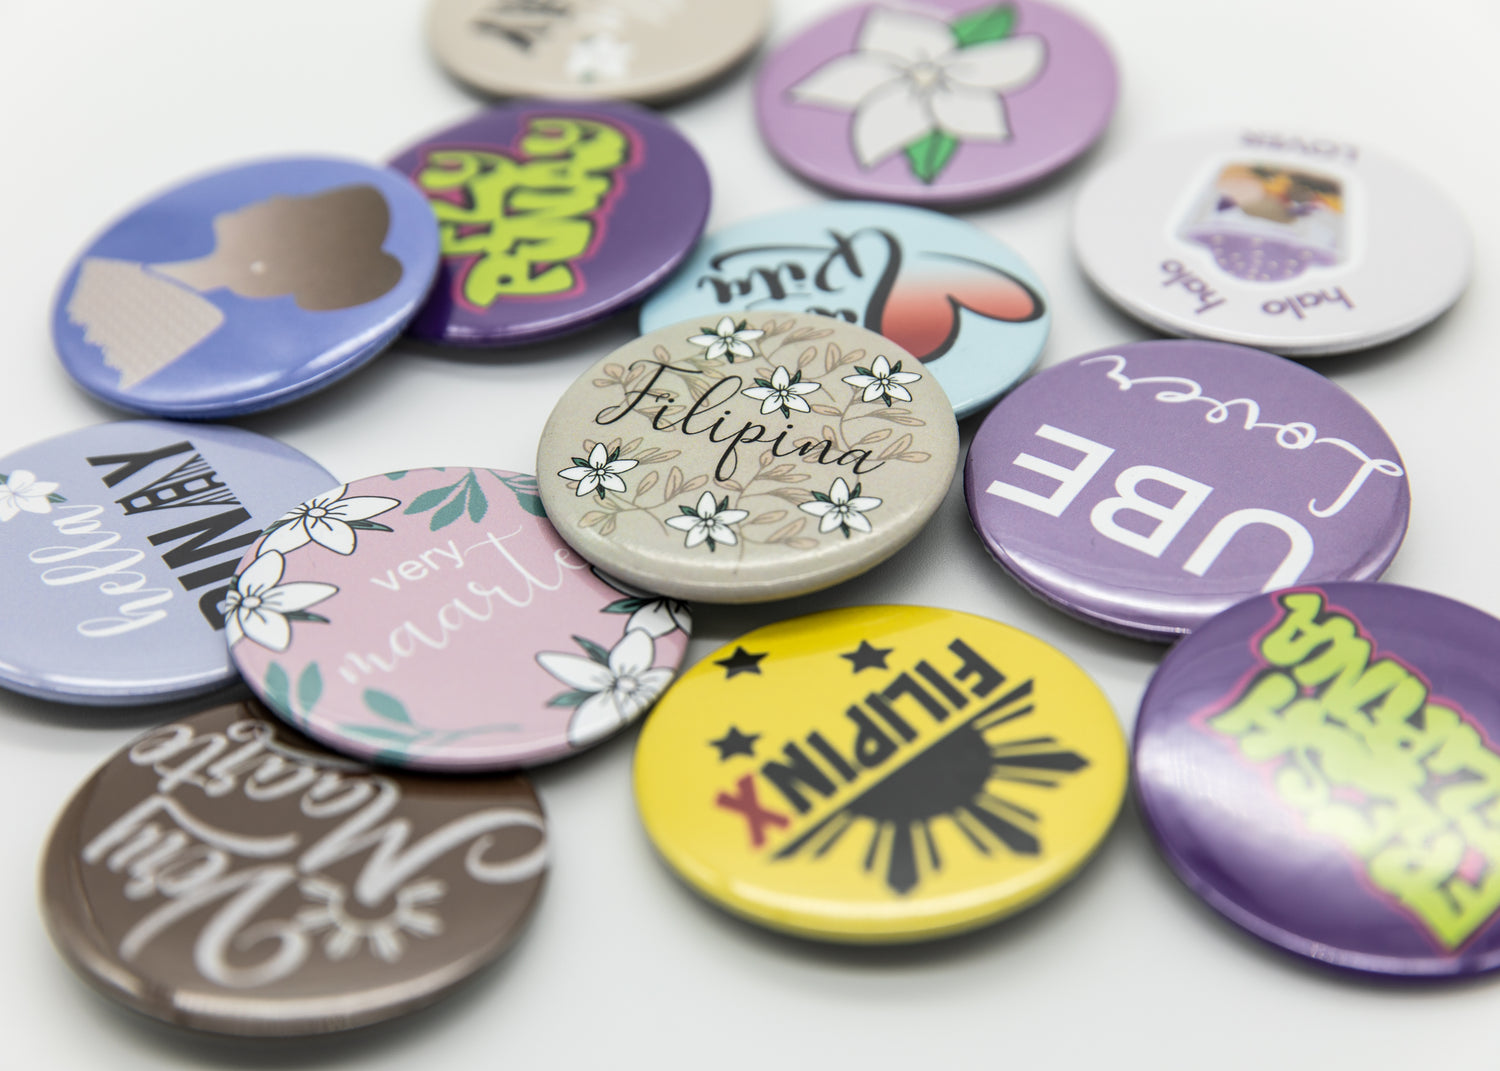 Buttons, Pins, Magnets, Stationaries and More